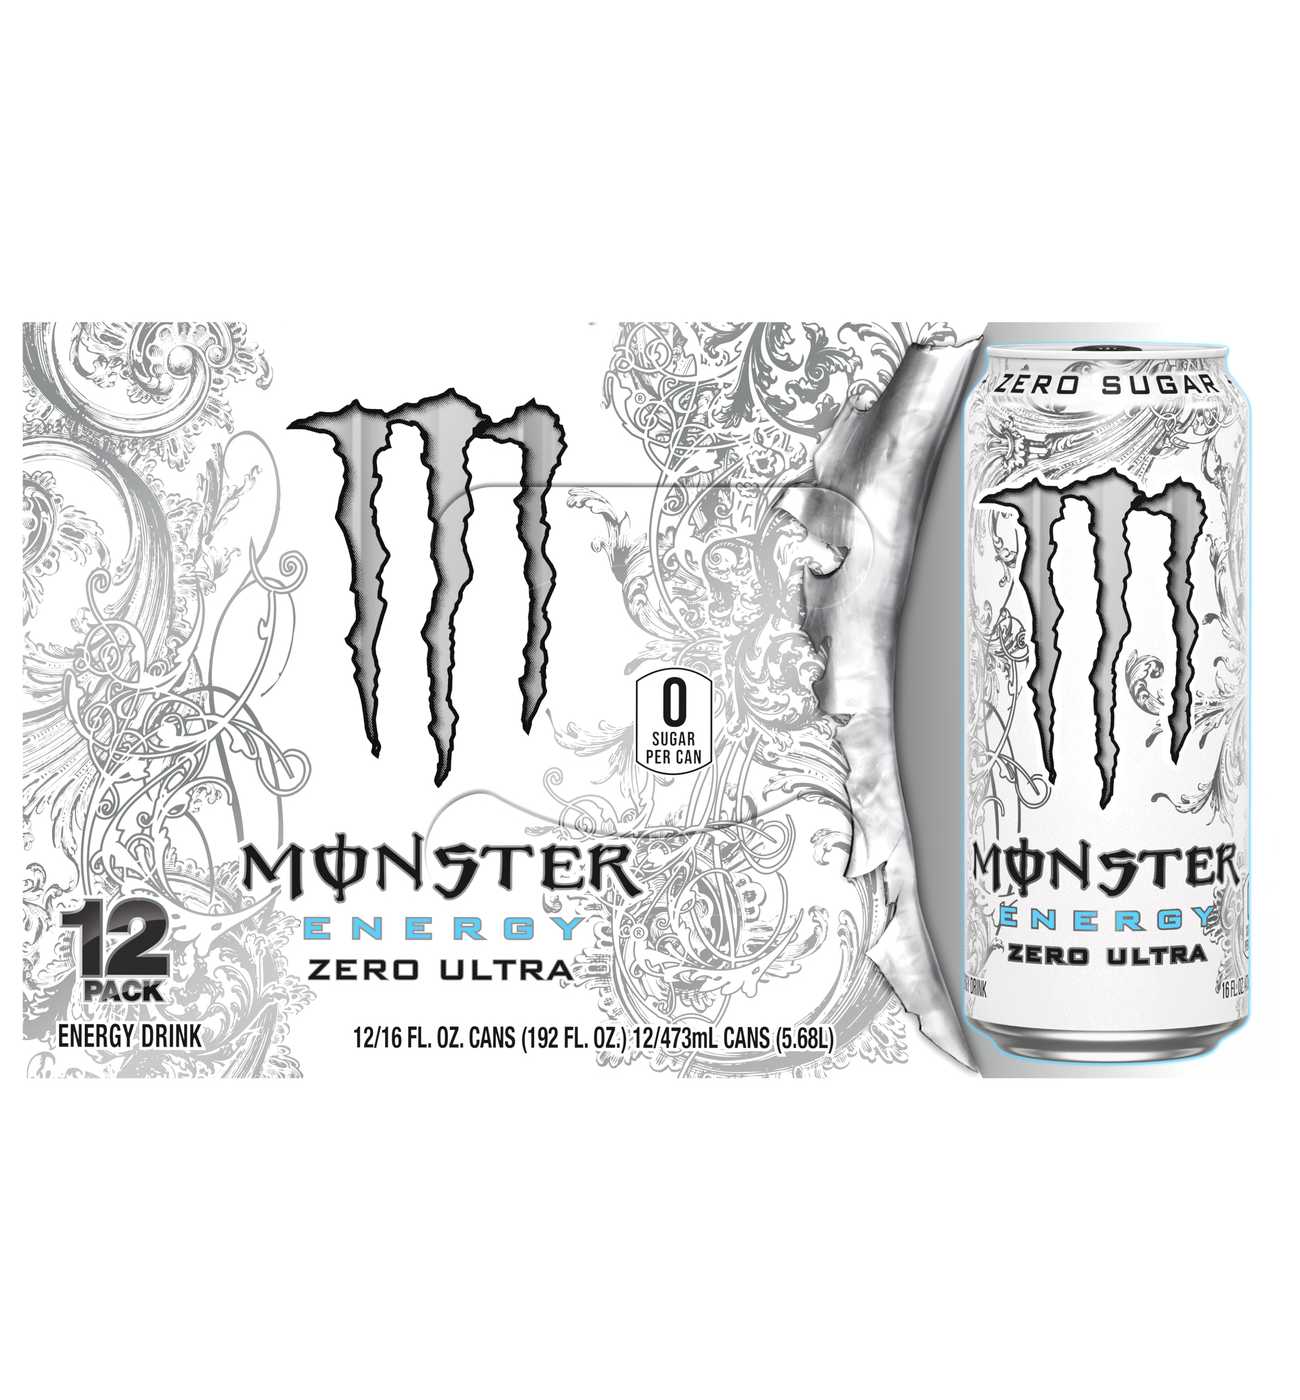 Monster Energy Zero Ultra, Sugar Free Energy Drink, 16 oz. Cans; image 1 of 2